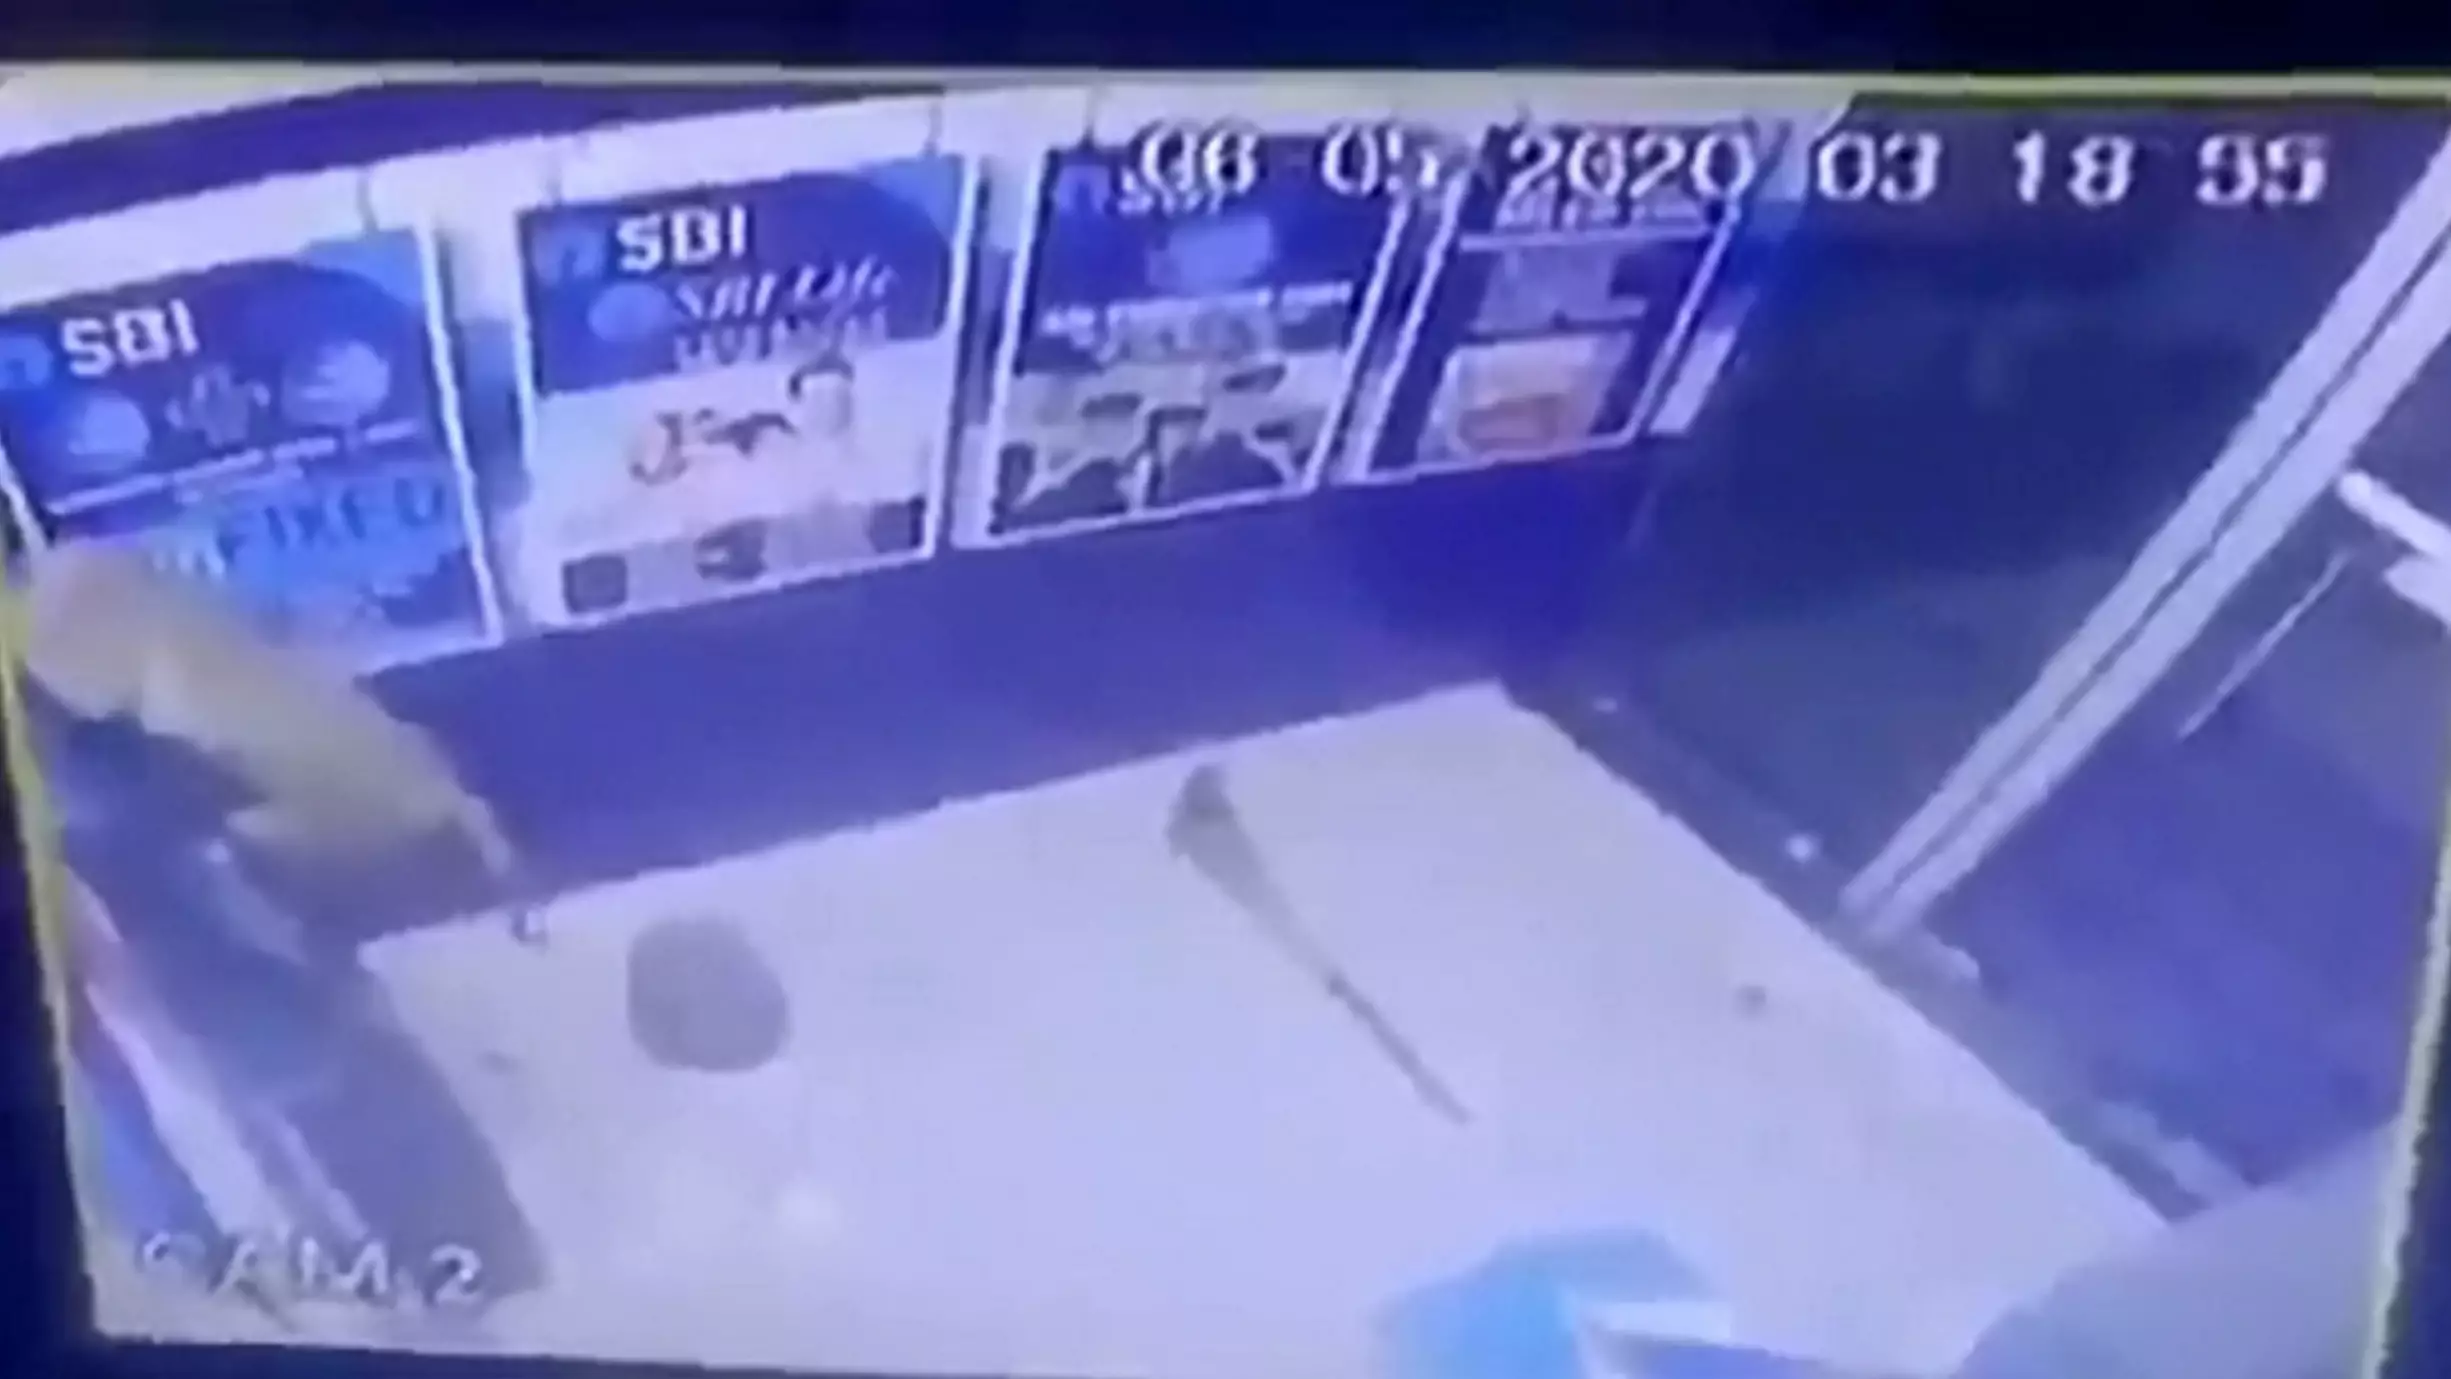 CCTV Reveals Suspected Bank Robbery Actually Monkey Smashing The ATM